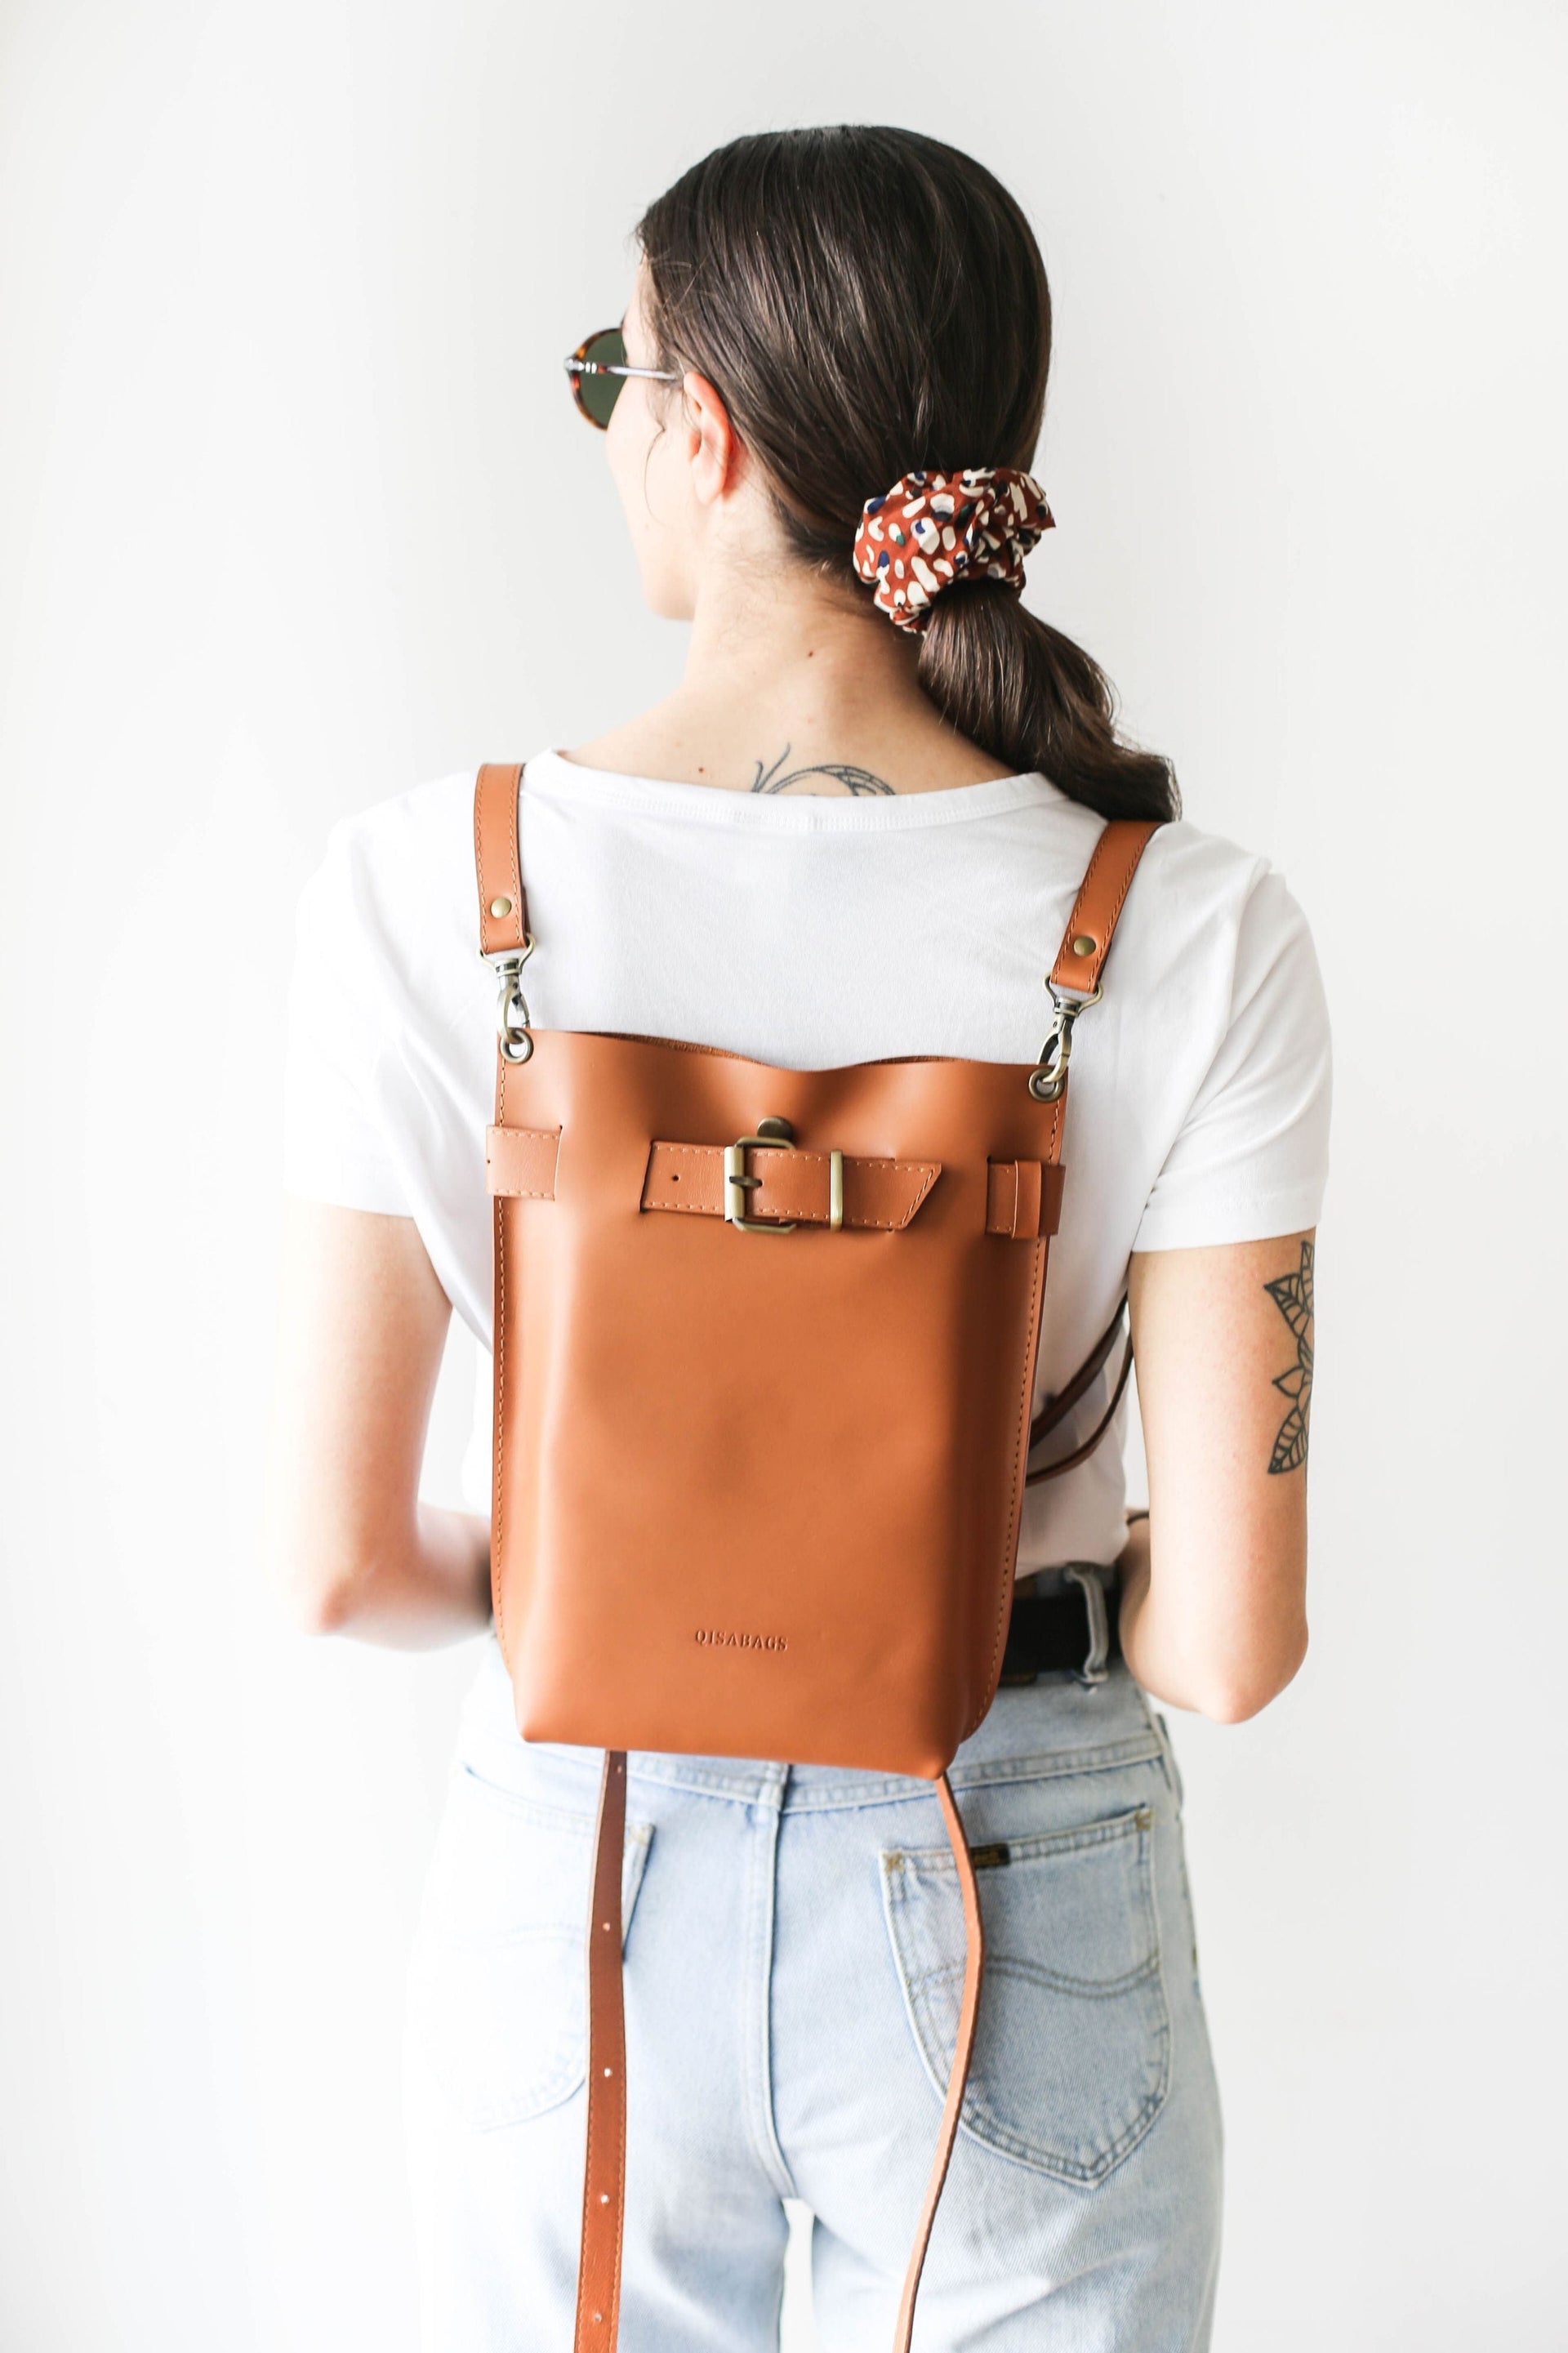 Leather Backpack Brown Leather Backpack Purse Minimalist 